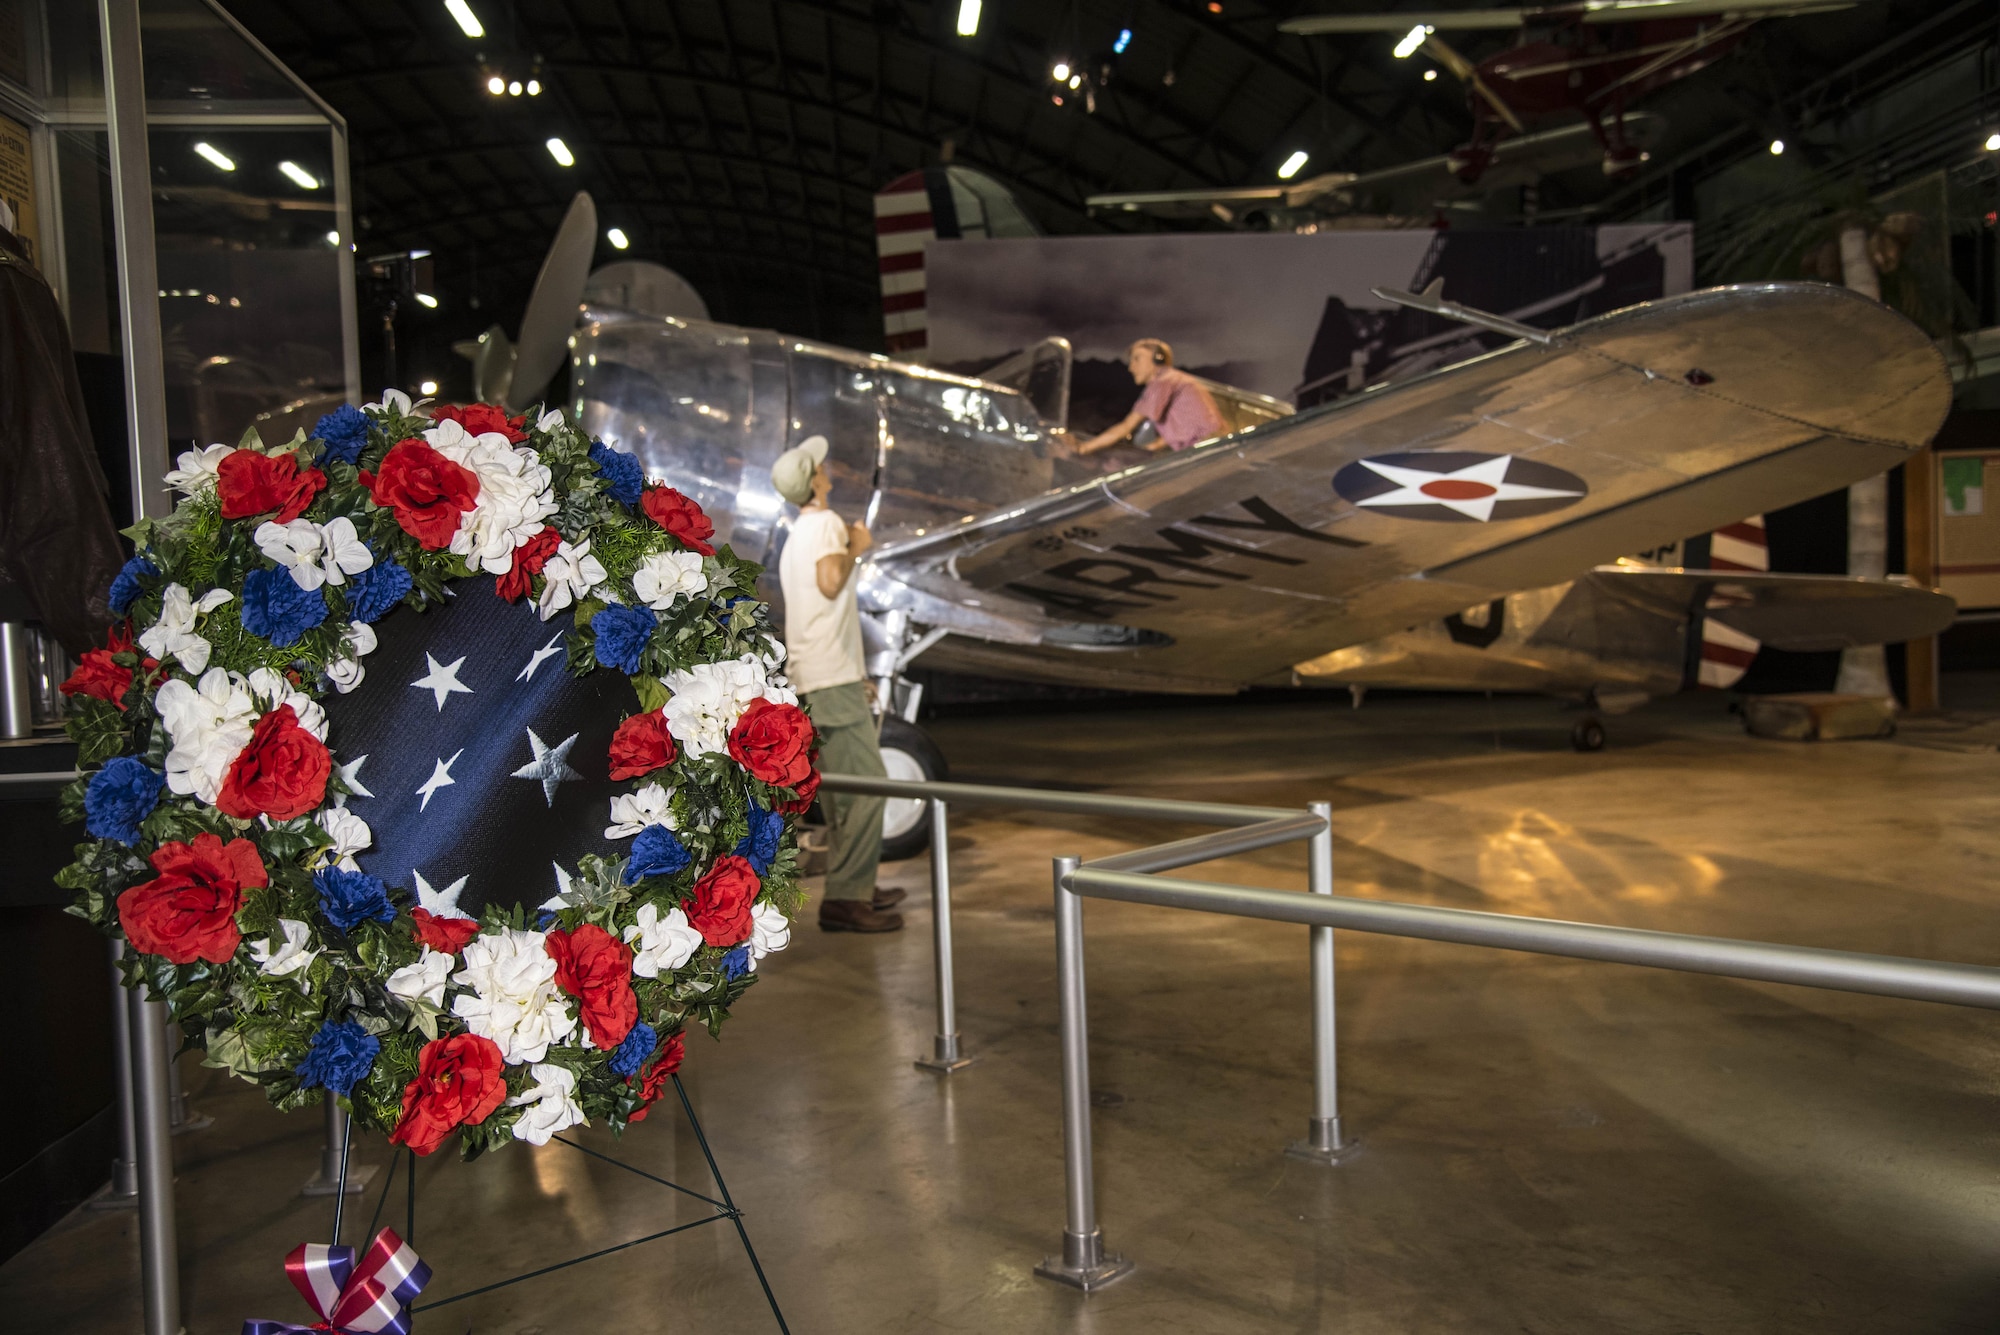 DAYTON, Ohio - This wreath was on display in the WWII Gallery on Dec. 7, 2016, for the 75th Anniversary of the Japanese attack on Pearl Harbor. The wreath was donated to the museum by Furst Florist in Dayton, Ohio. (U.S. Air Force photo by Ken LaRock)